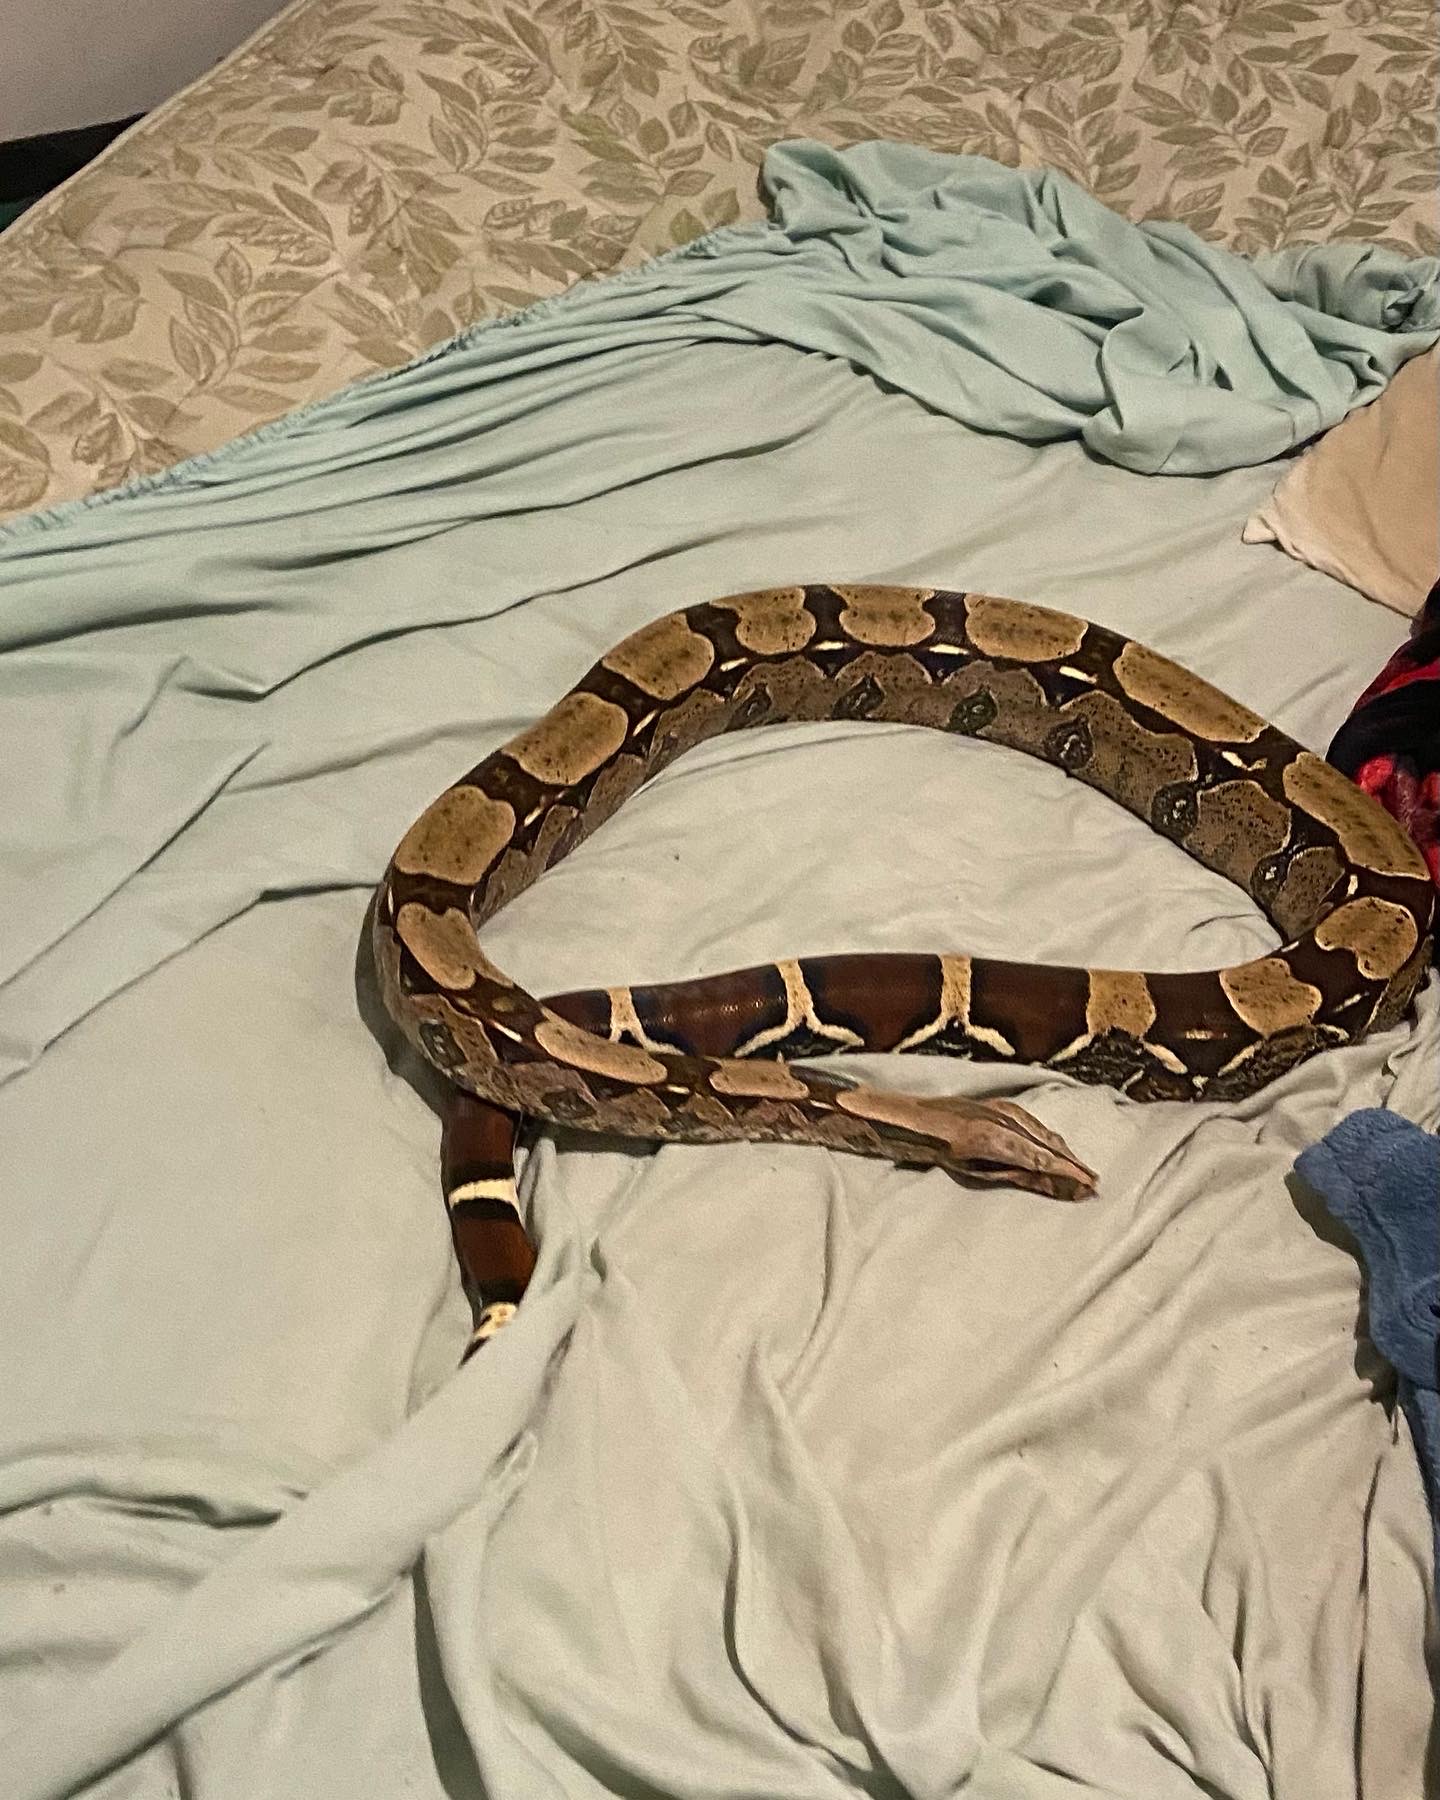 Boa Constrictor sitting on a bed